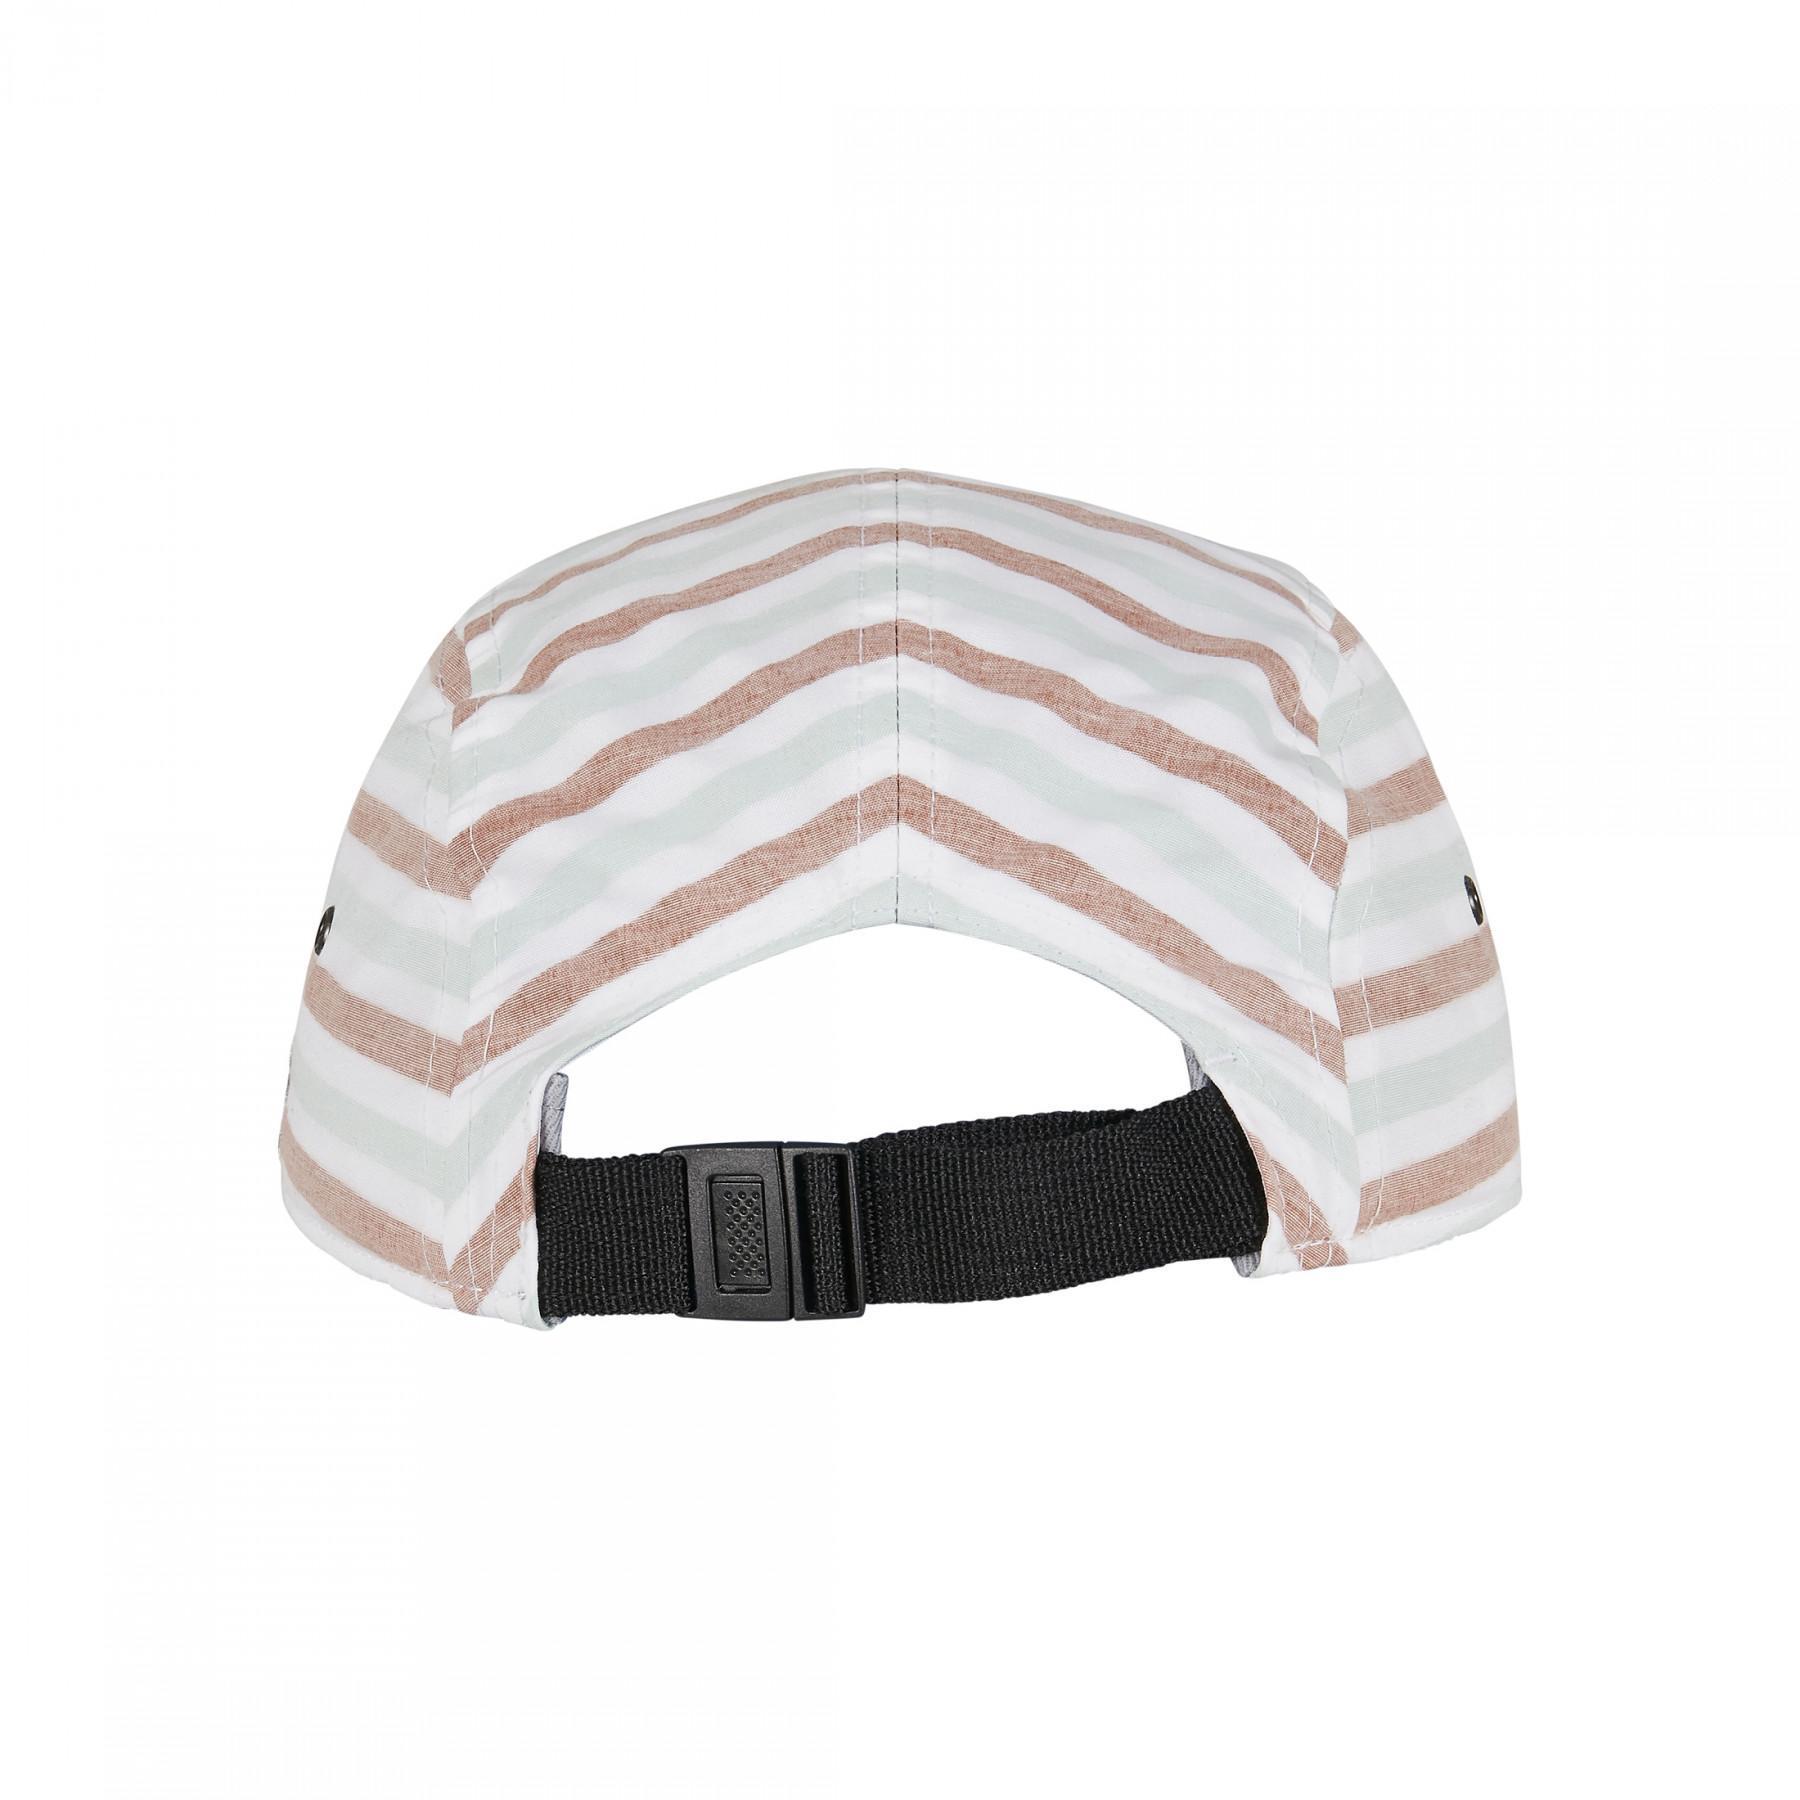 Casquette Cayler & Sons cl inside printed stripes 5 panel